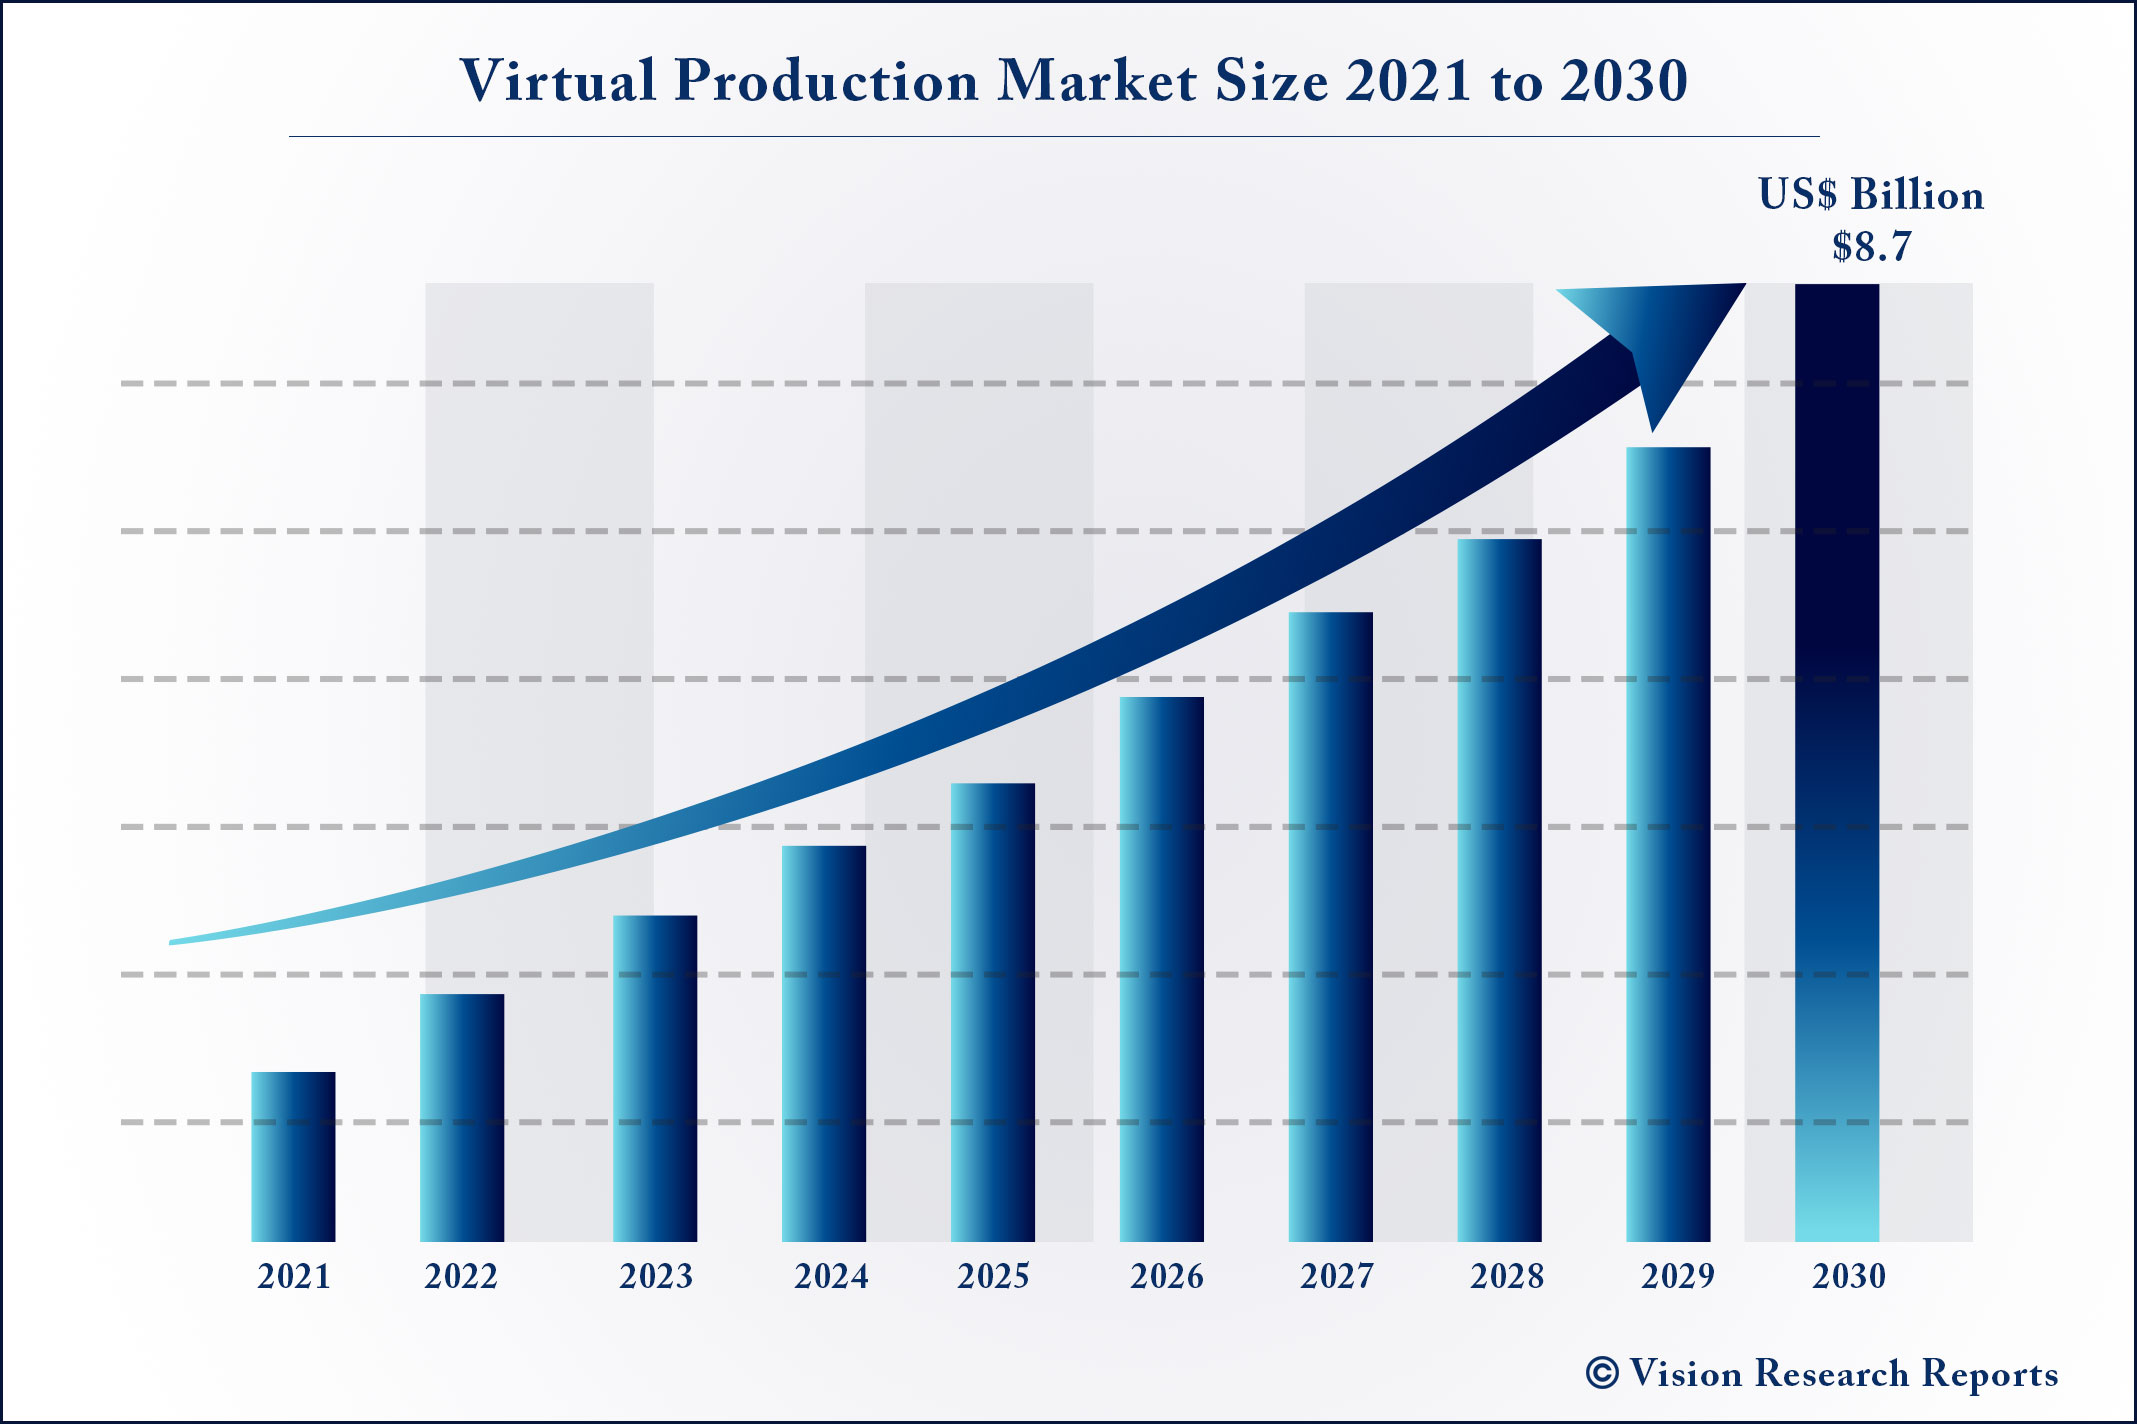 Virtual Production Market Size 2021 to 2030